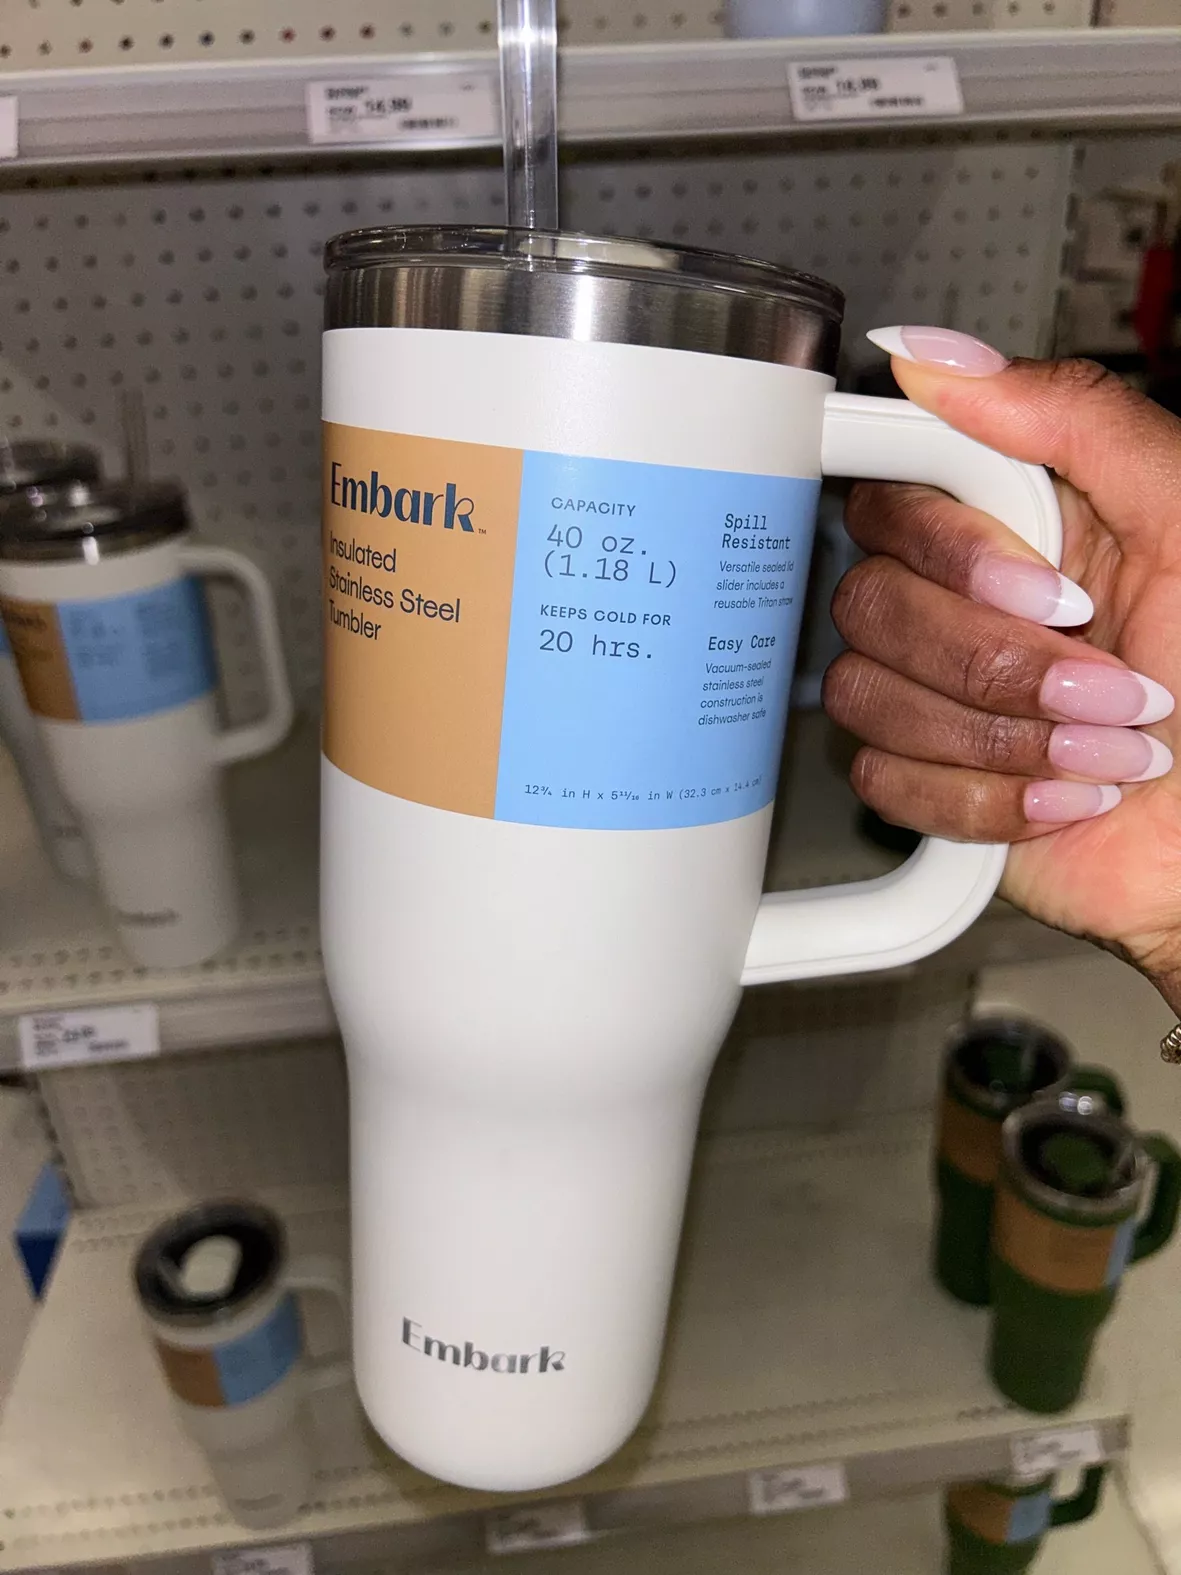 Starbucks Stanley Cups Are Being Sold At Target